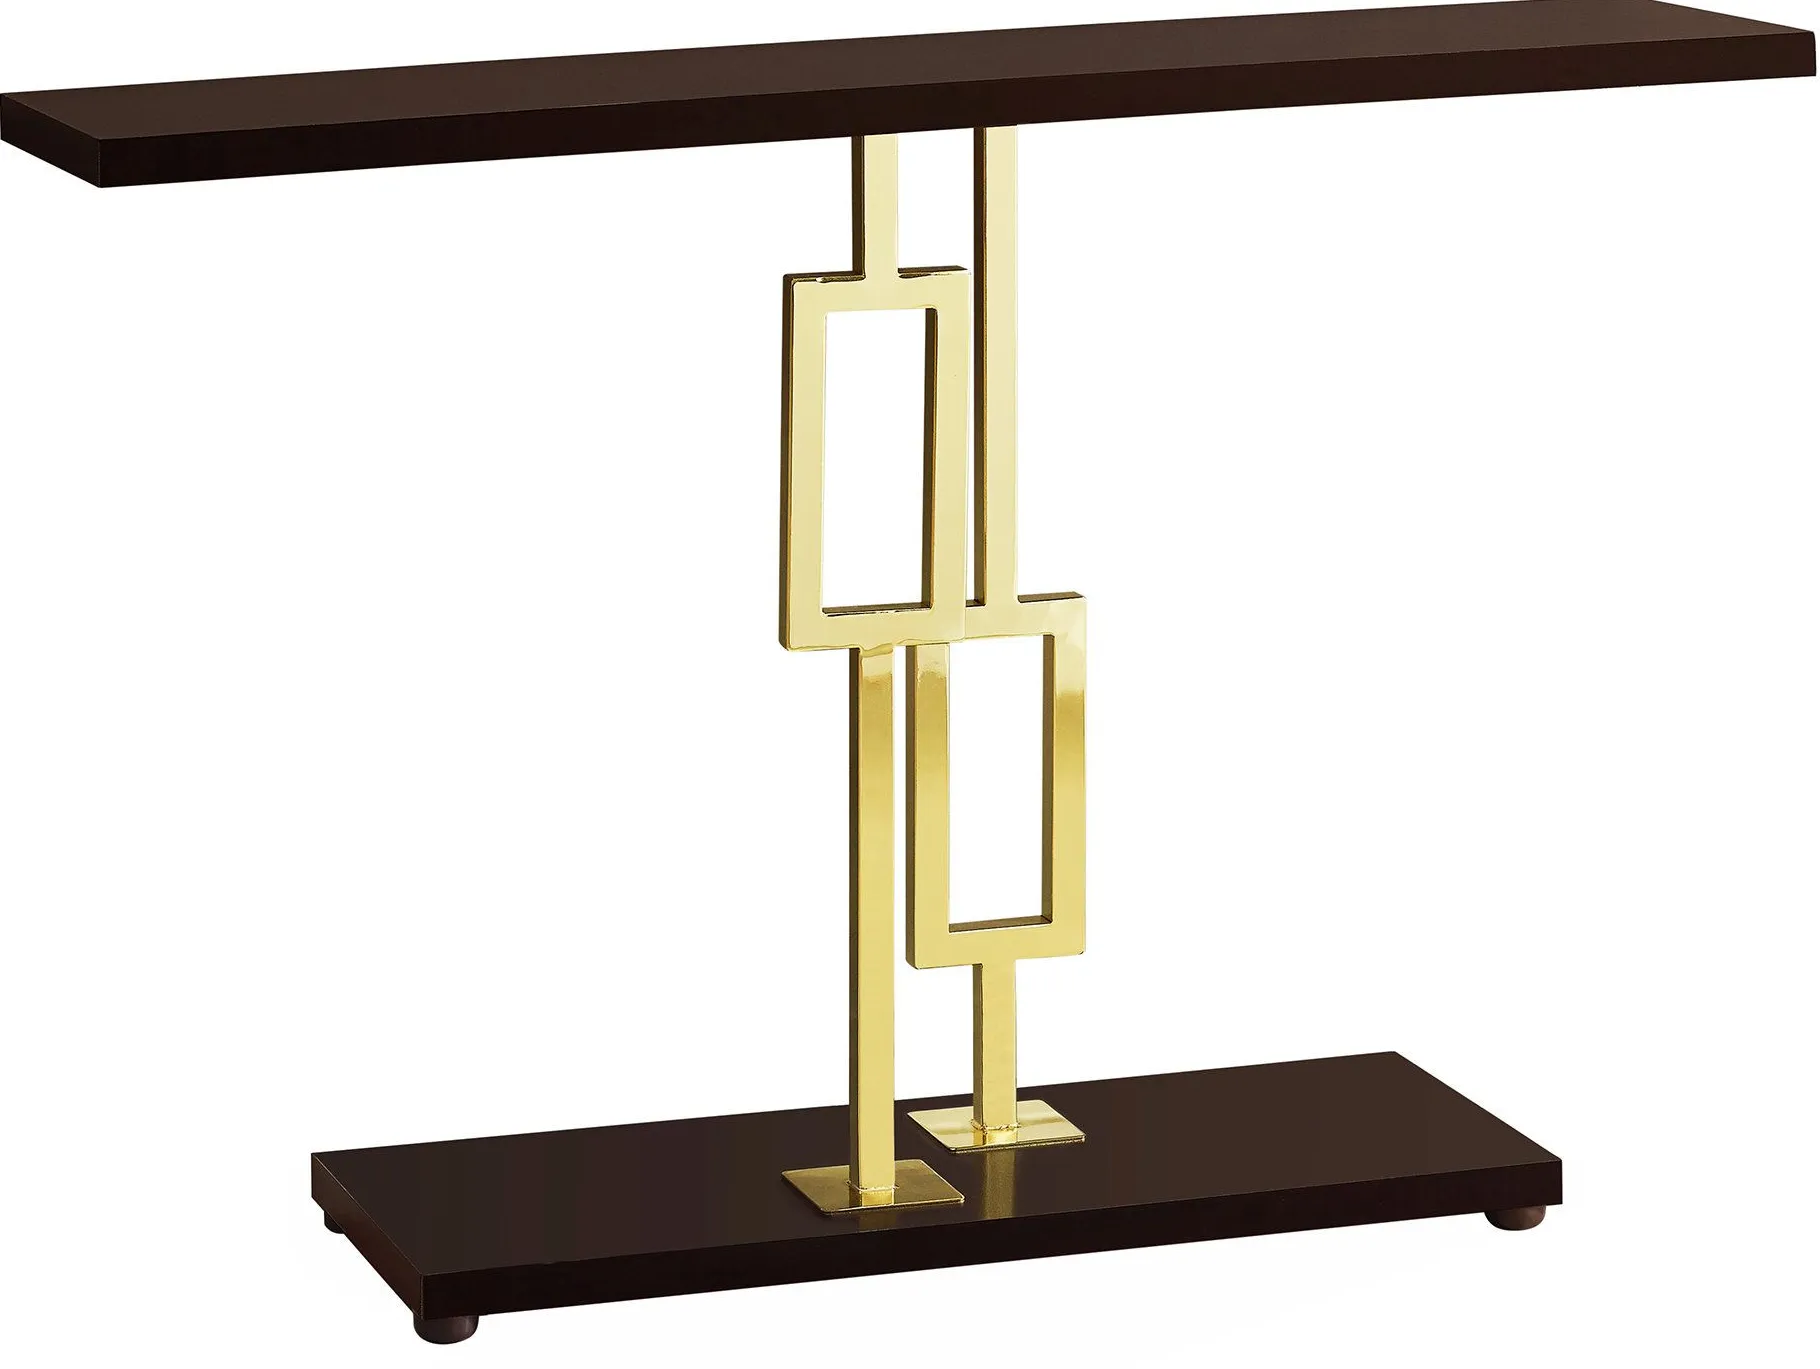 Accent Table, Console, Entryway, Narrow, Sofa, Living Room, Bedroom, Metal, Laminate, Brown, Gold, Contemporary, Modern